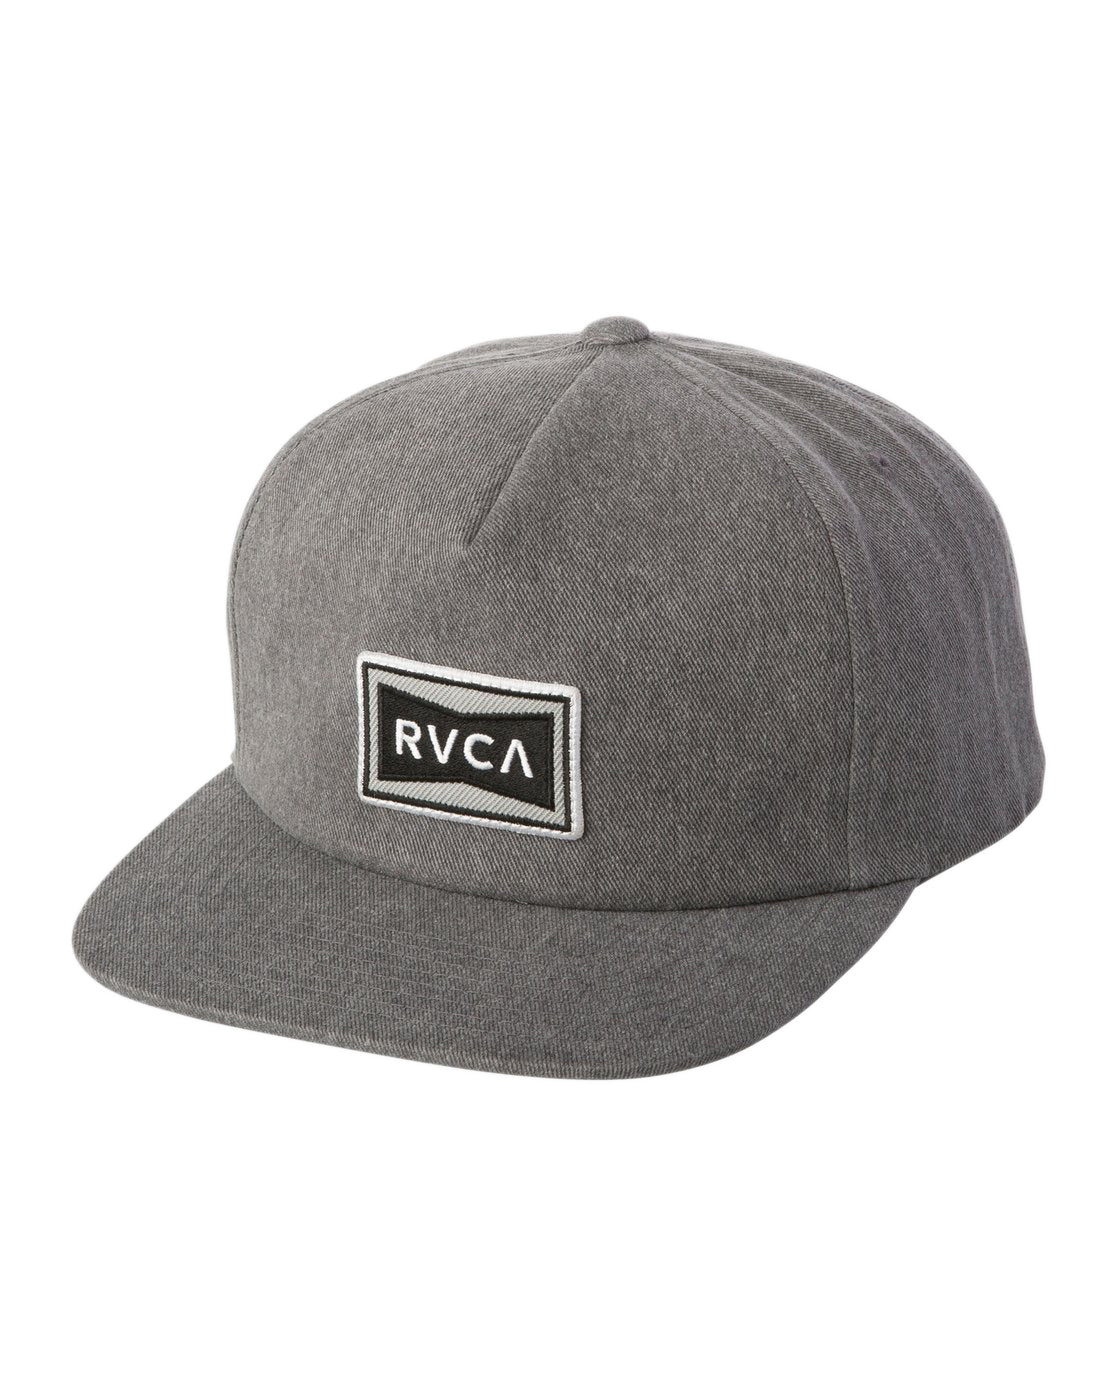 RVCA Pace Mens Hat